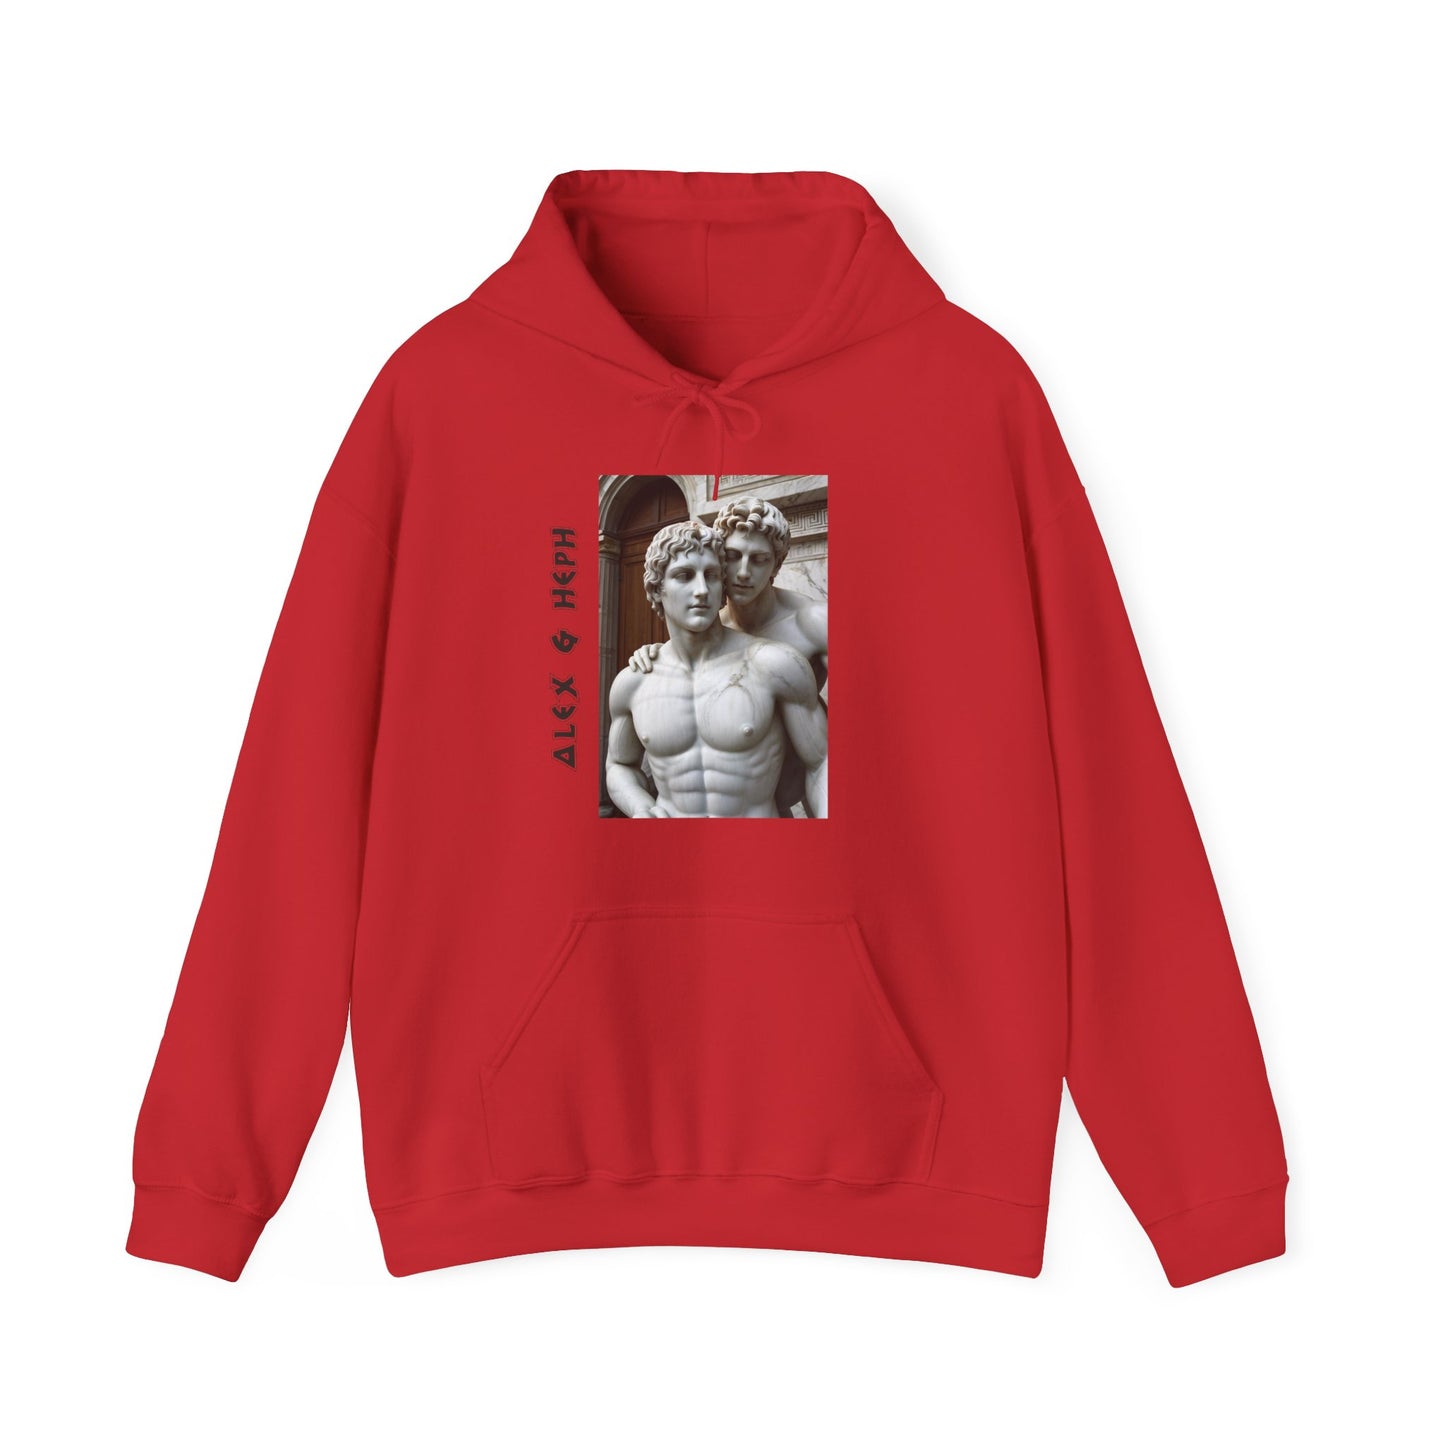 Alex & Heph Marble Statues - Alexander the Great and Hephaestion Heavy Blend™ Hooded Sweatshirt